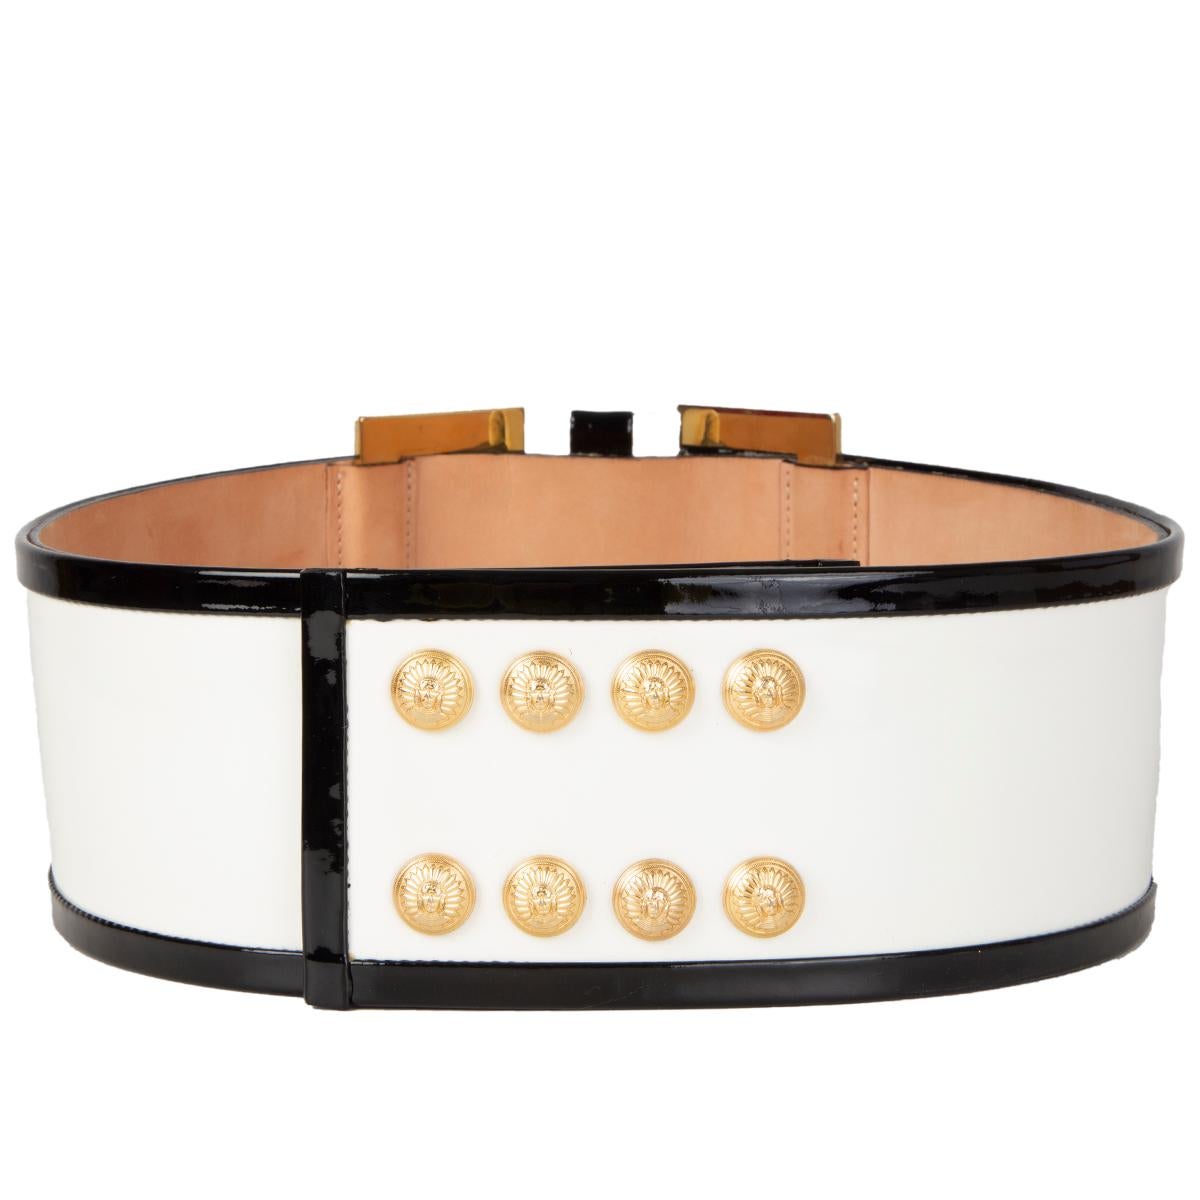 Balmain wide waist belt in black and white patent leather with gold-tone metal buckle and adjustable push button closure. Has been worn with four small spots on the front part. Overall condition is very good.

Tag Size 36
Size XS
Width 8cm